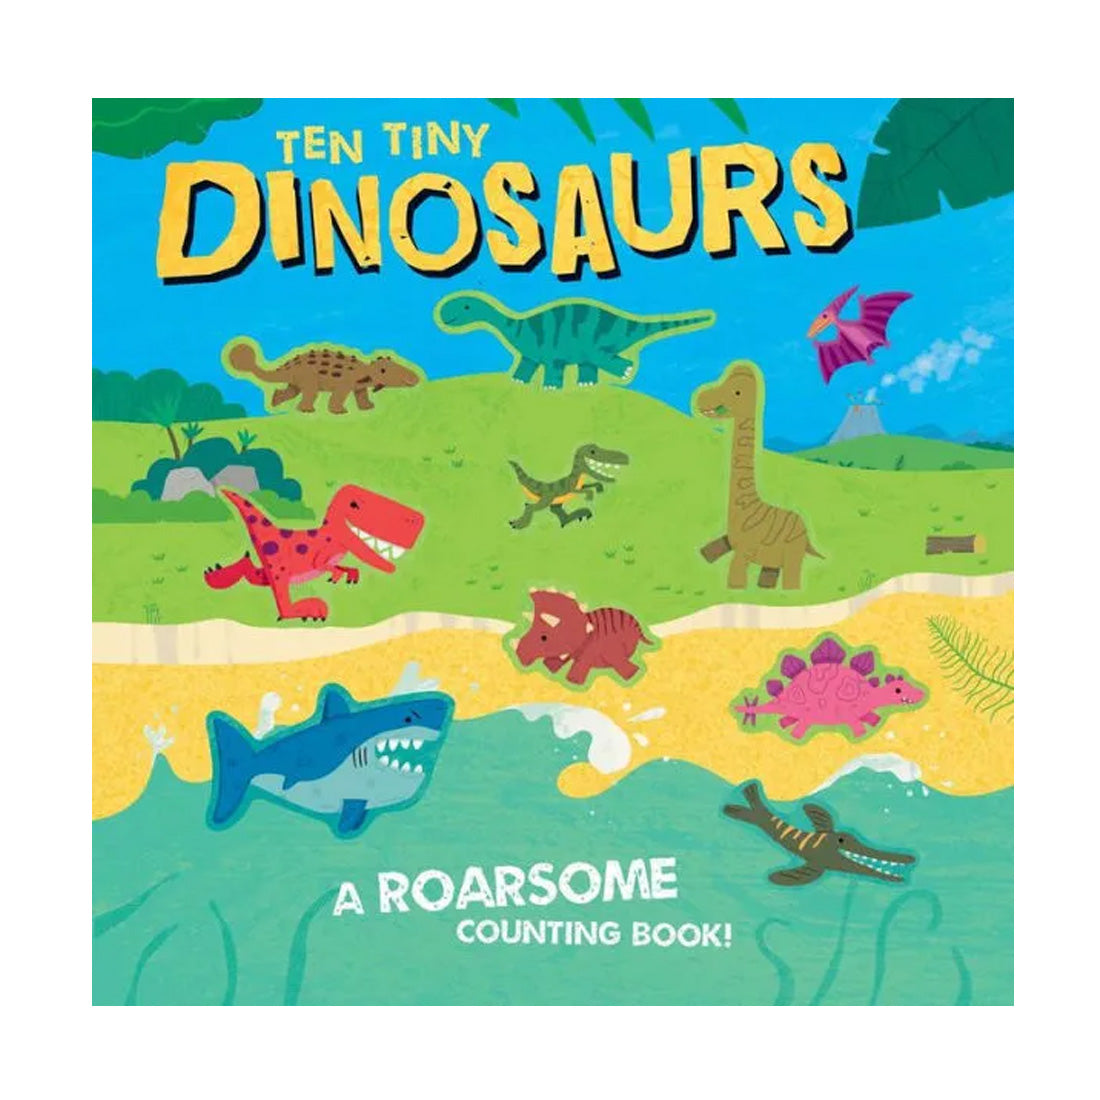 Ten Tiny Dinosaurs: Counting Book